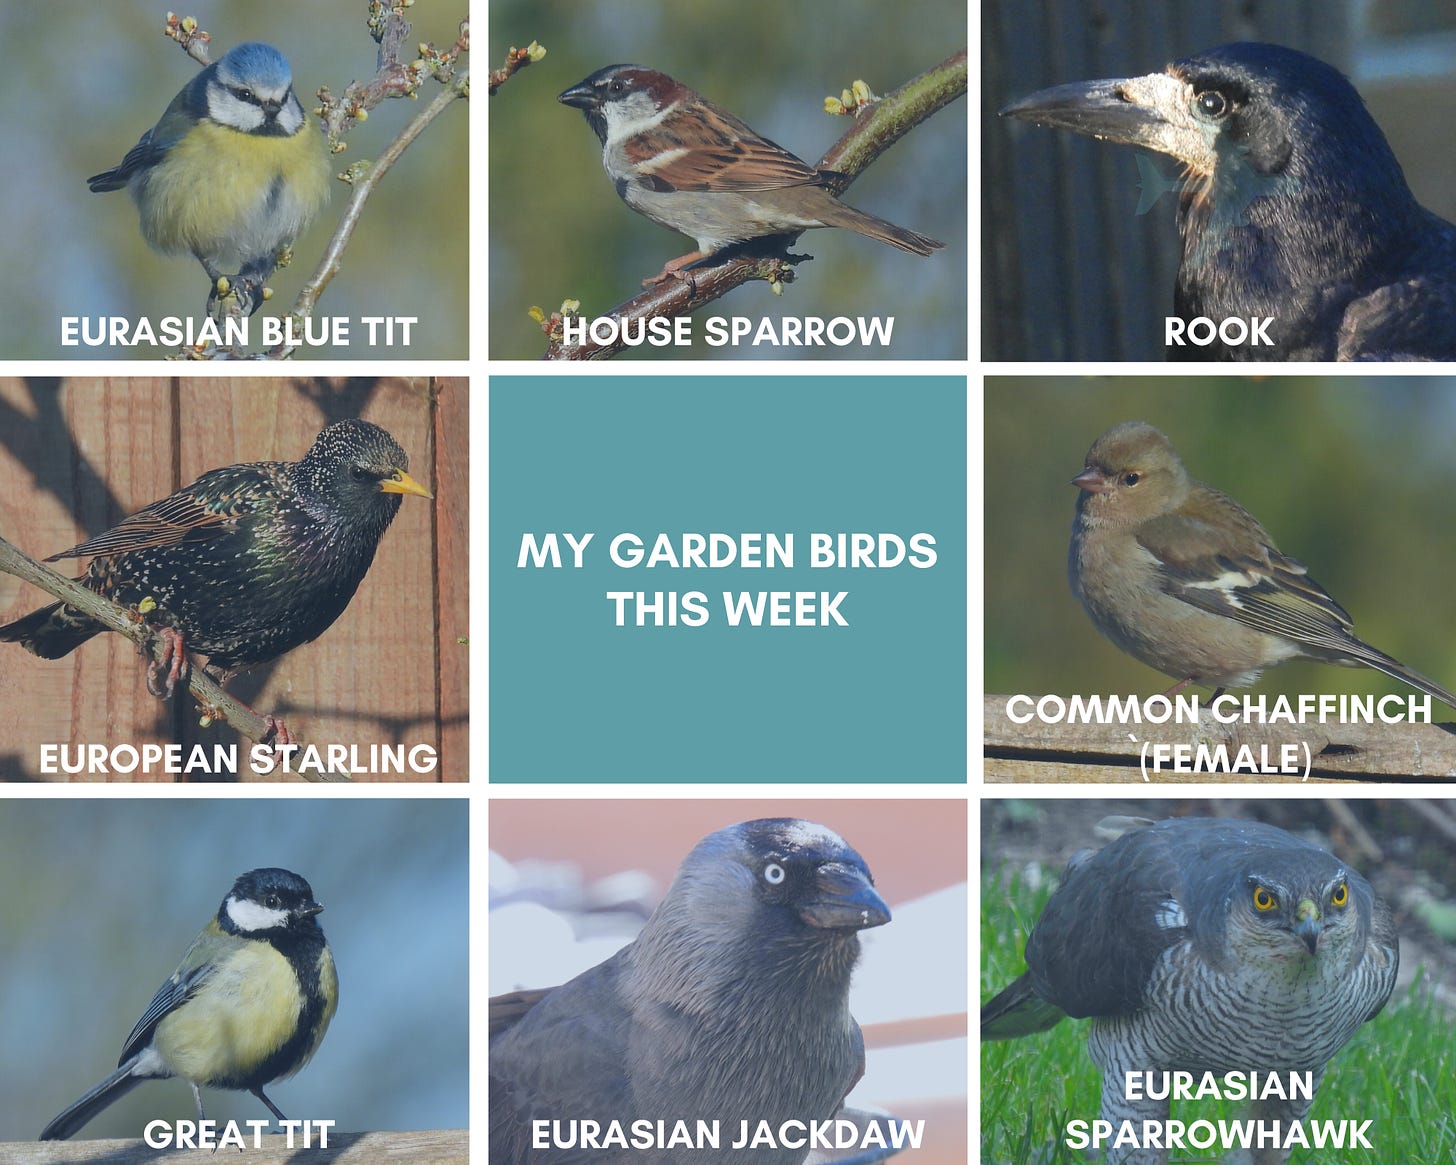 A grid of 9 squares, 8 of which contain a photo of a garden bird. From top left: Blue Tit, House Sparrow, Rook, Chaffinch , Sparrowhawk, Jackdaw, House Sparrow, Starling. The centre square contains white text on a blue background - My garden birds this week. 